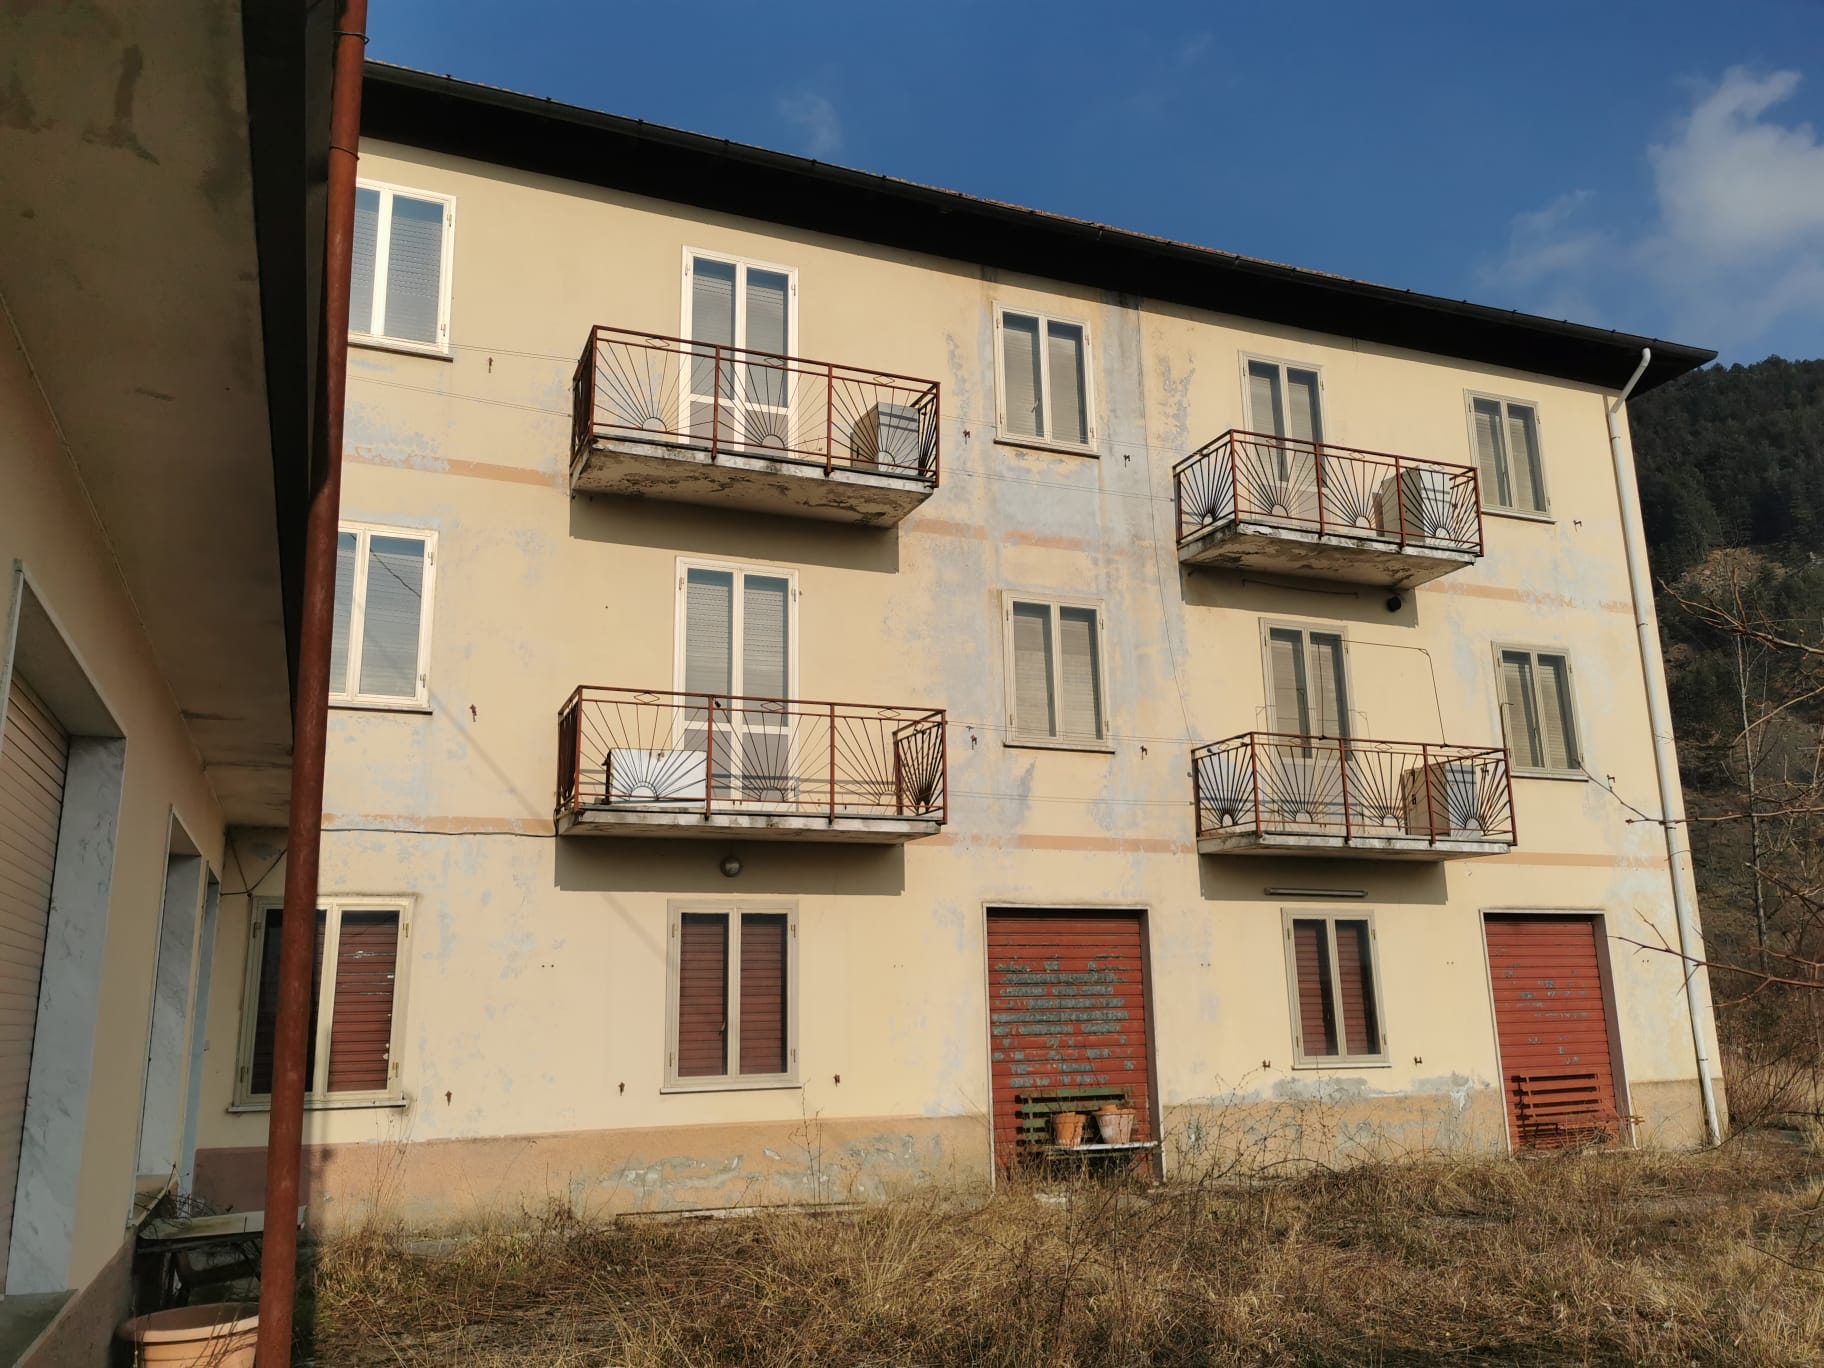 IL COLORE – 12 Apartments with land